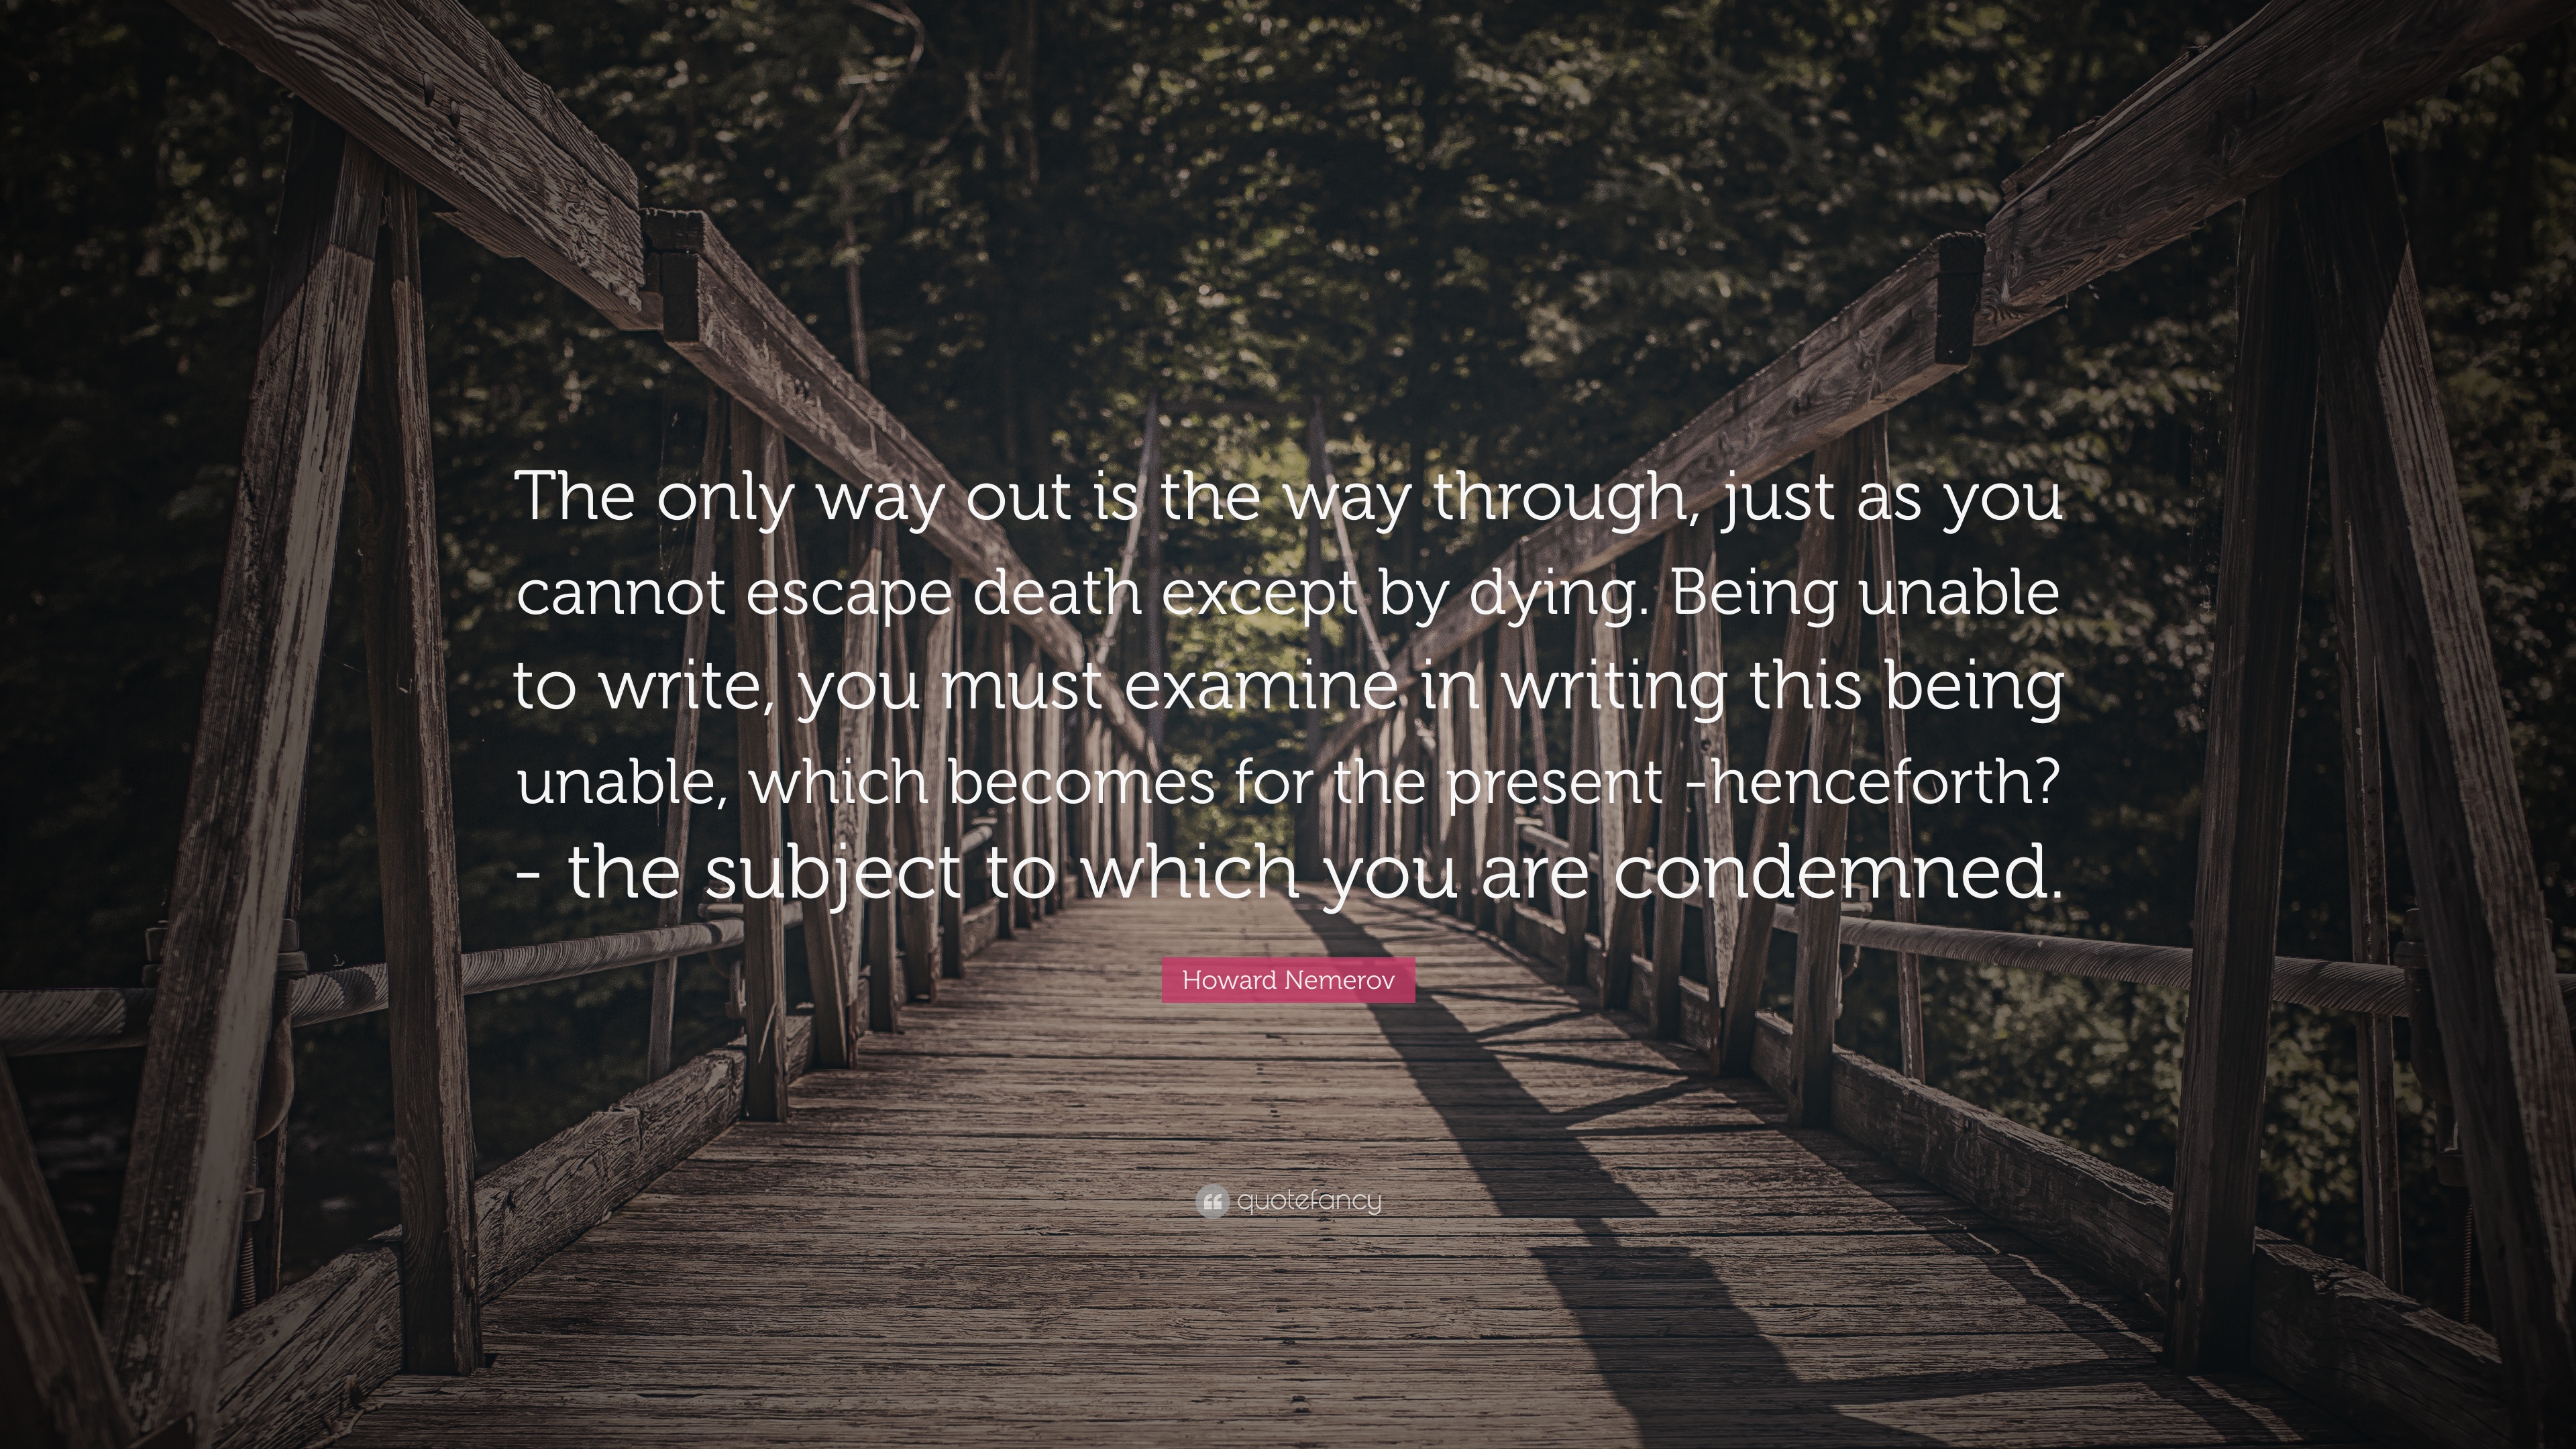 Howard Nemerov Quote: “The only way out is the way through, just as ...